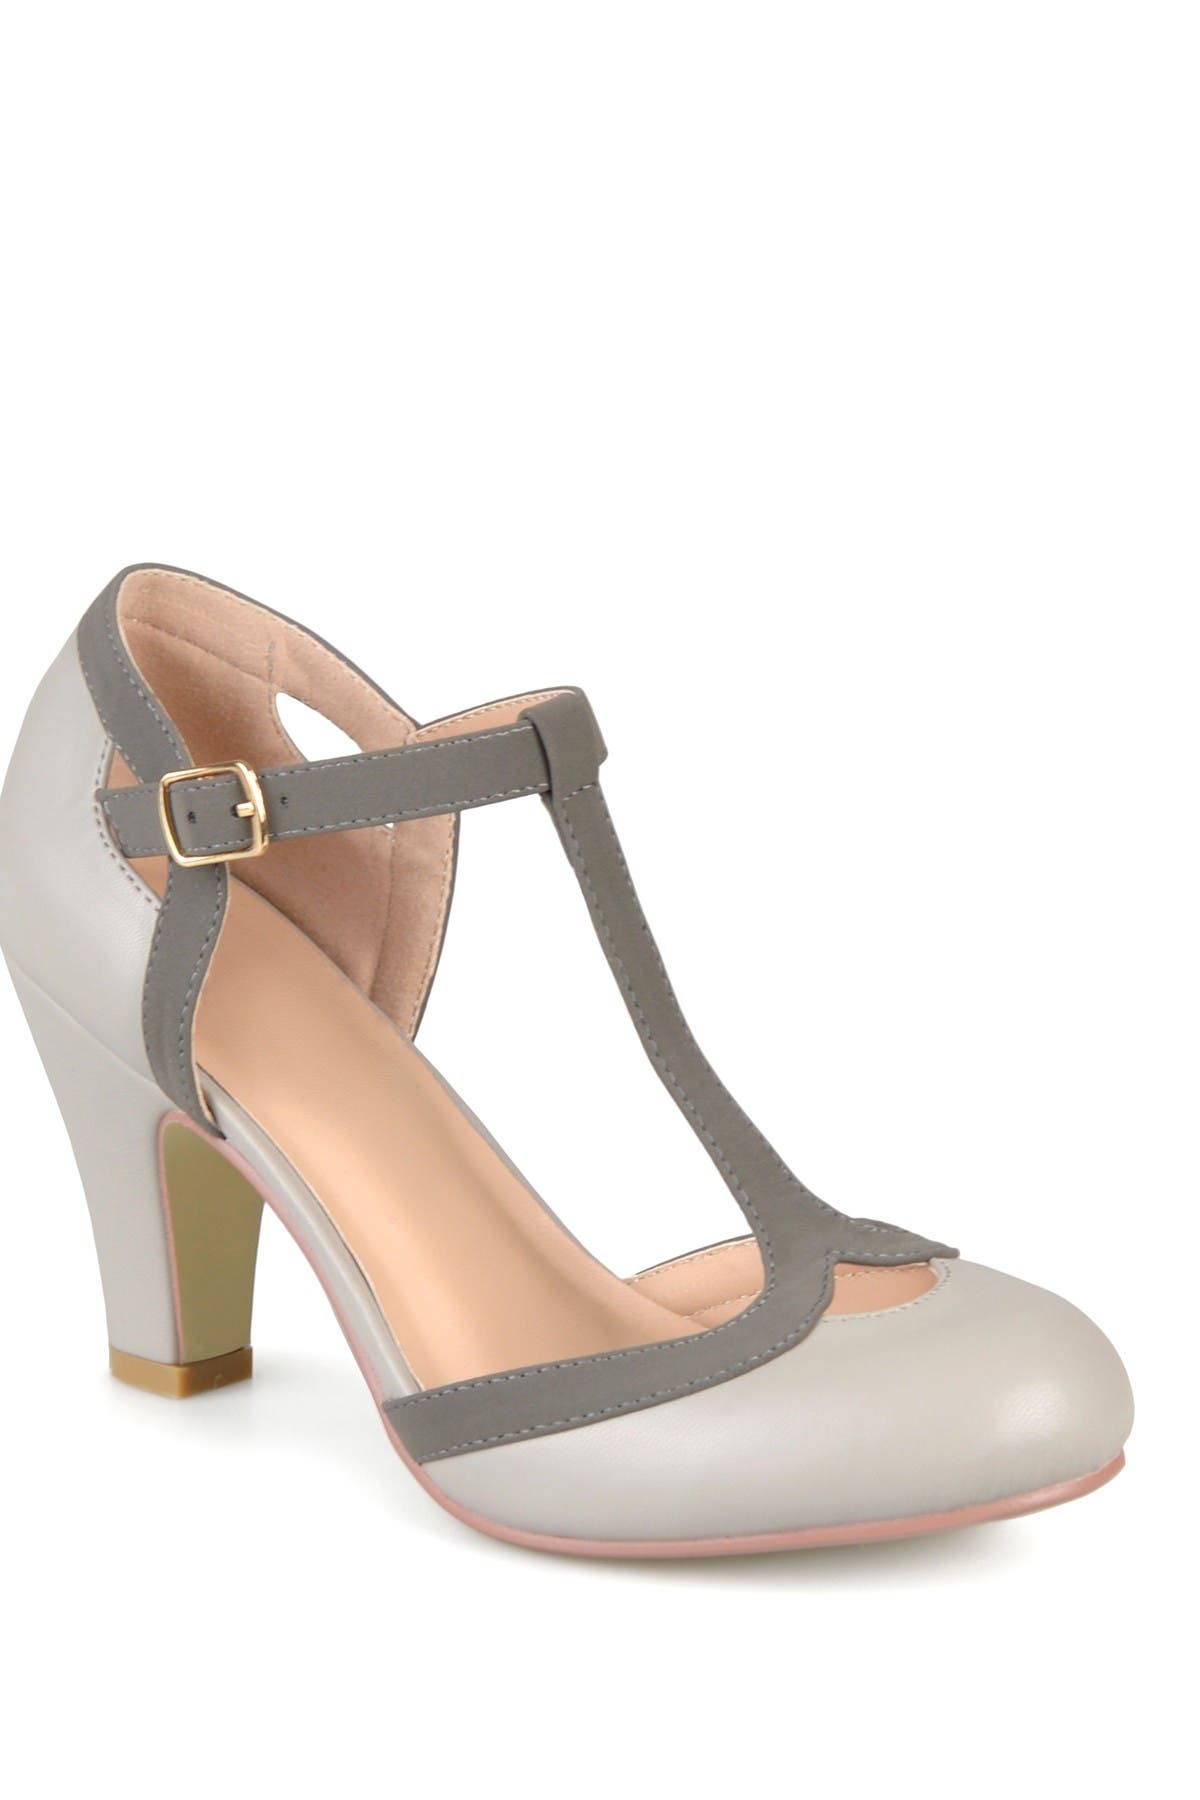 JOURNEE Collection | Olina T-Strap Pump 